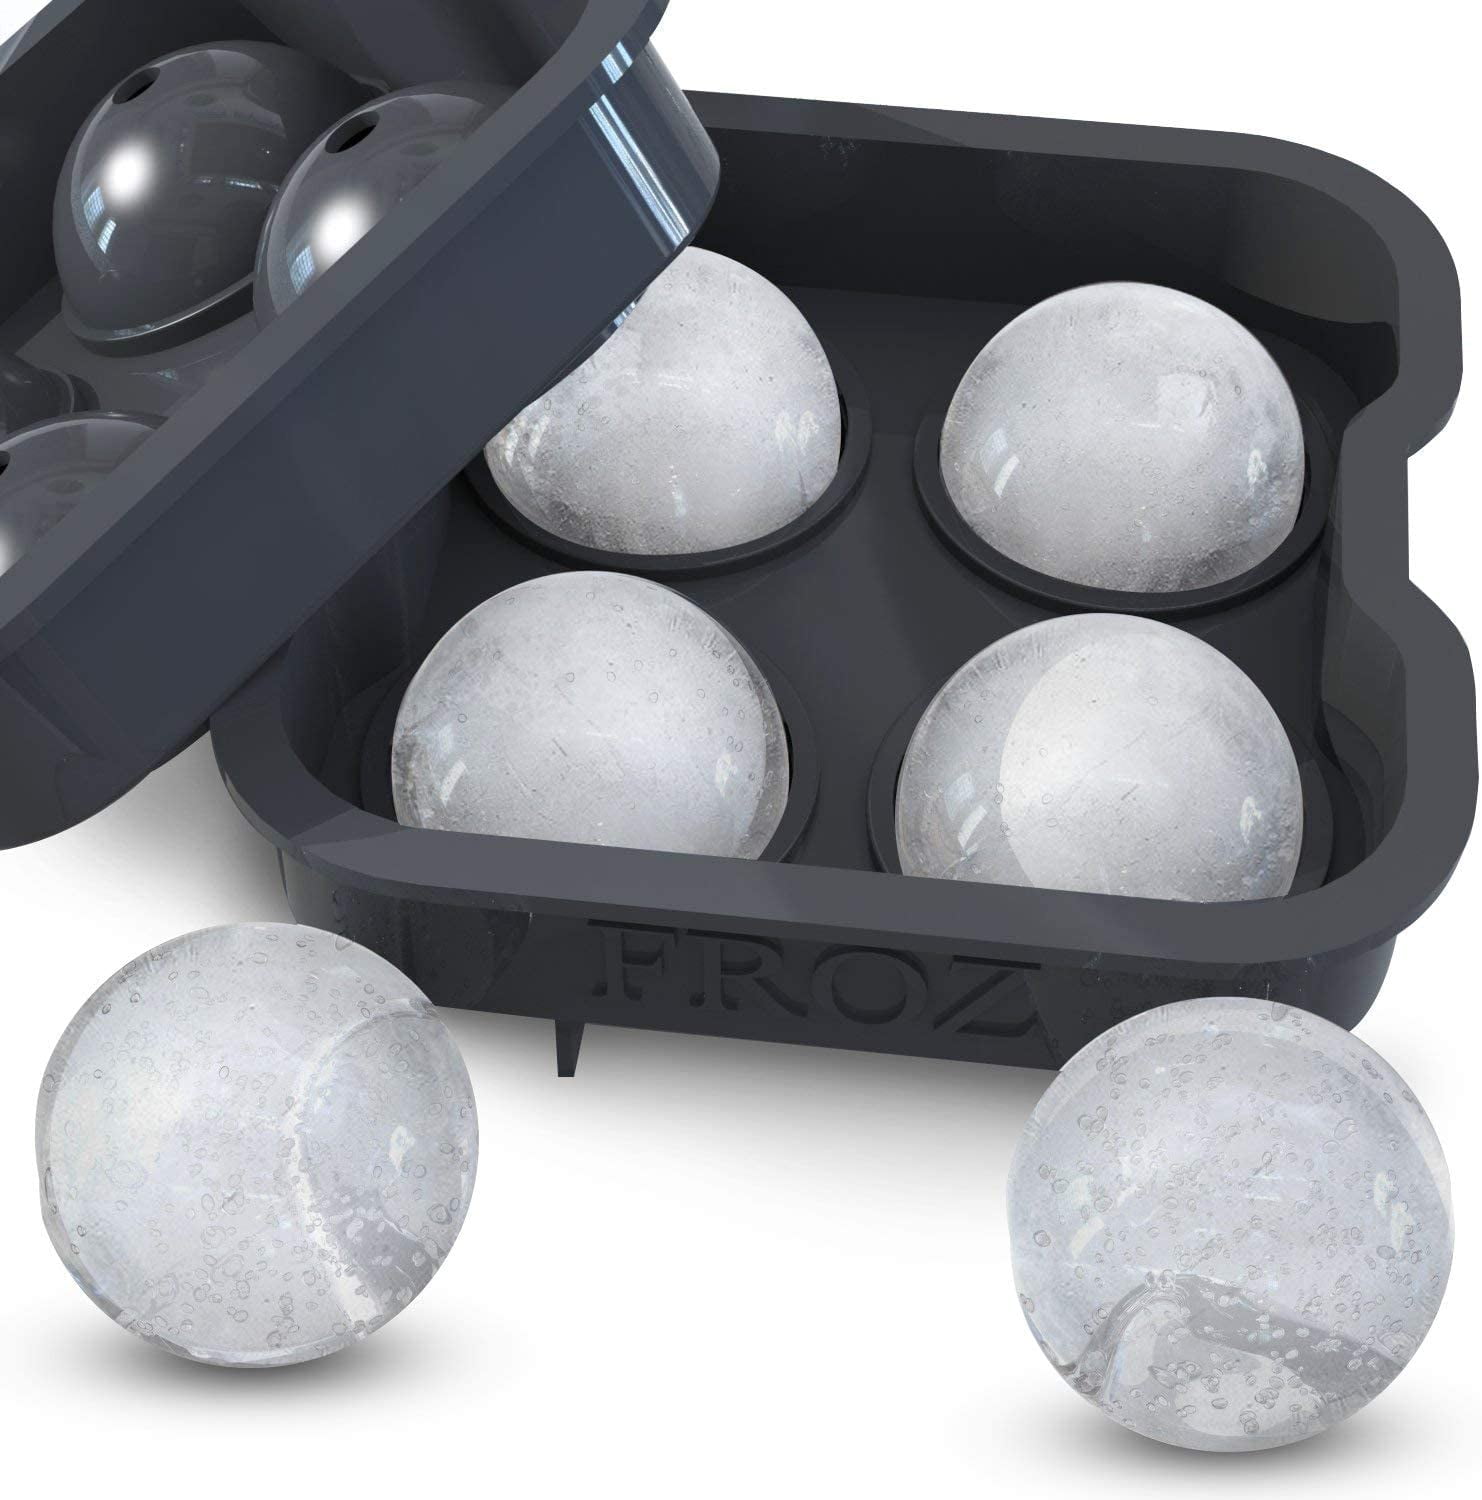 FROZ Crystal-Clear Ice Ball Maker 2 Cavity Sphere Ice Mold Makes Two Large 2.3 